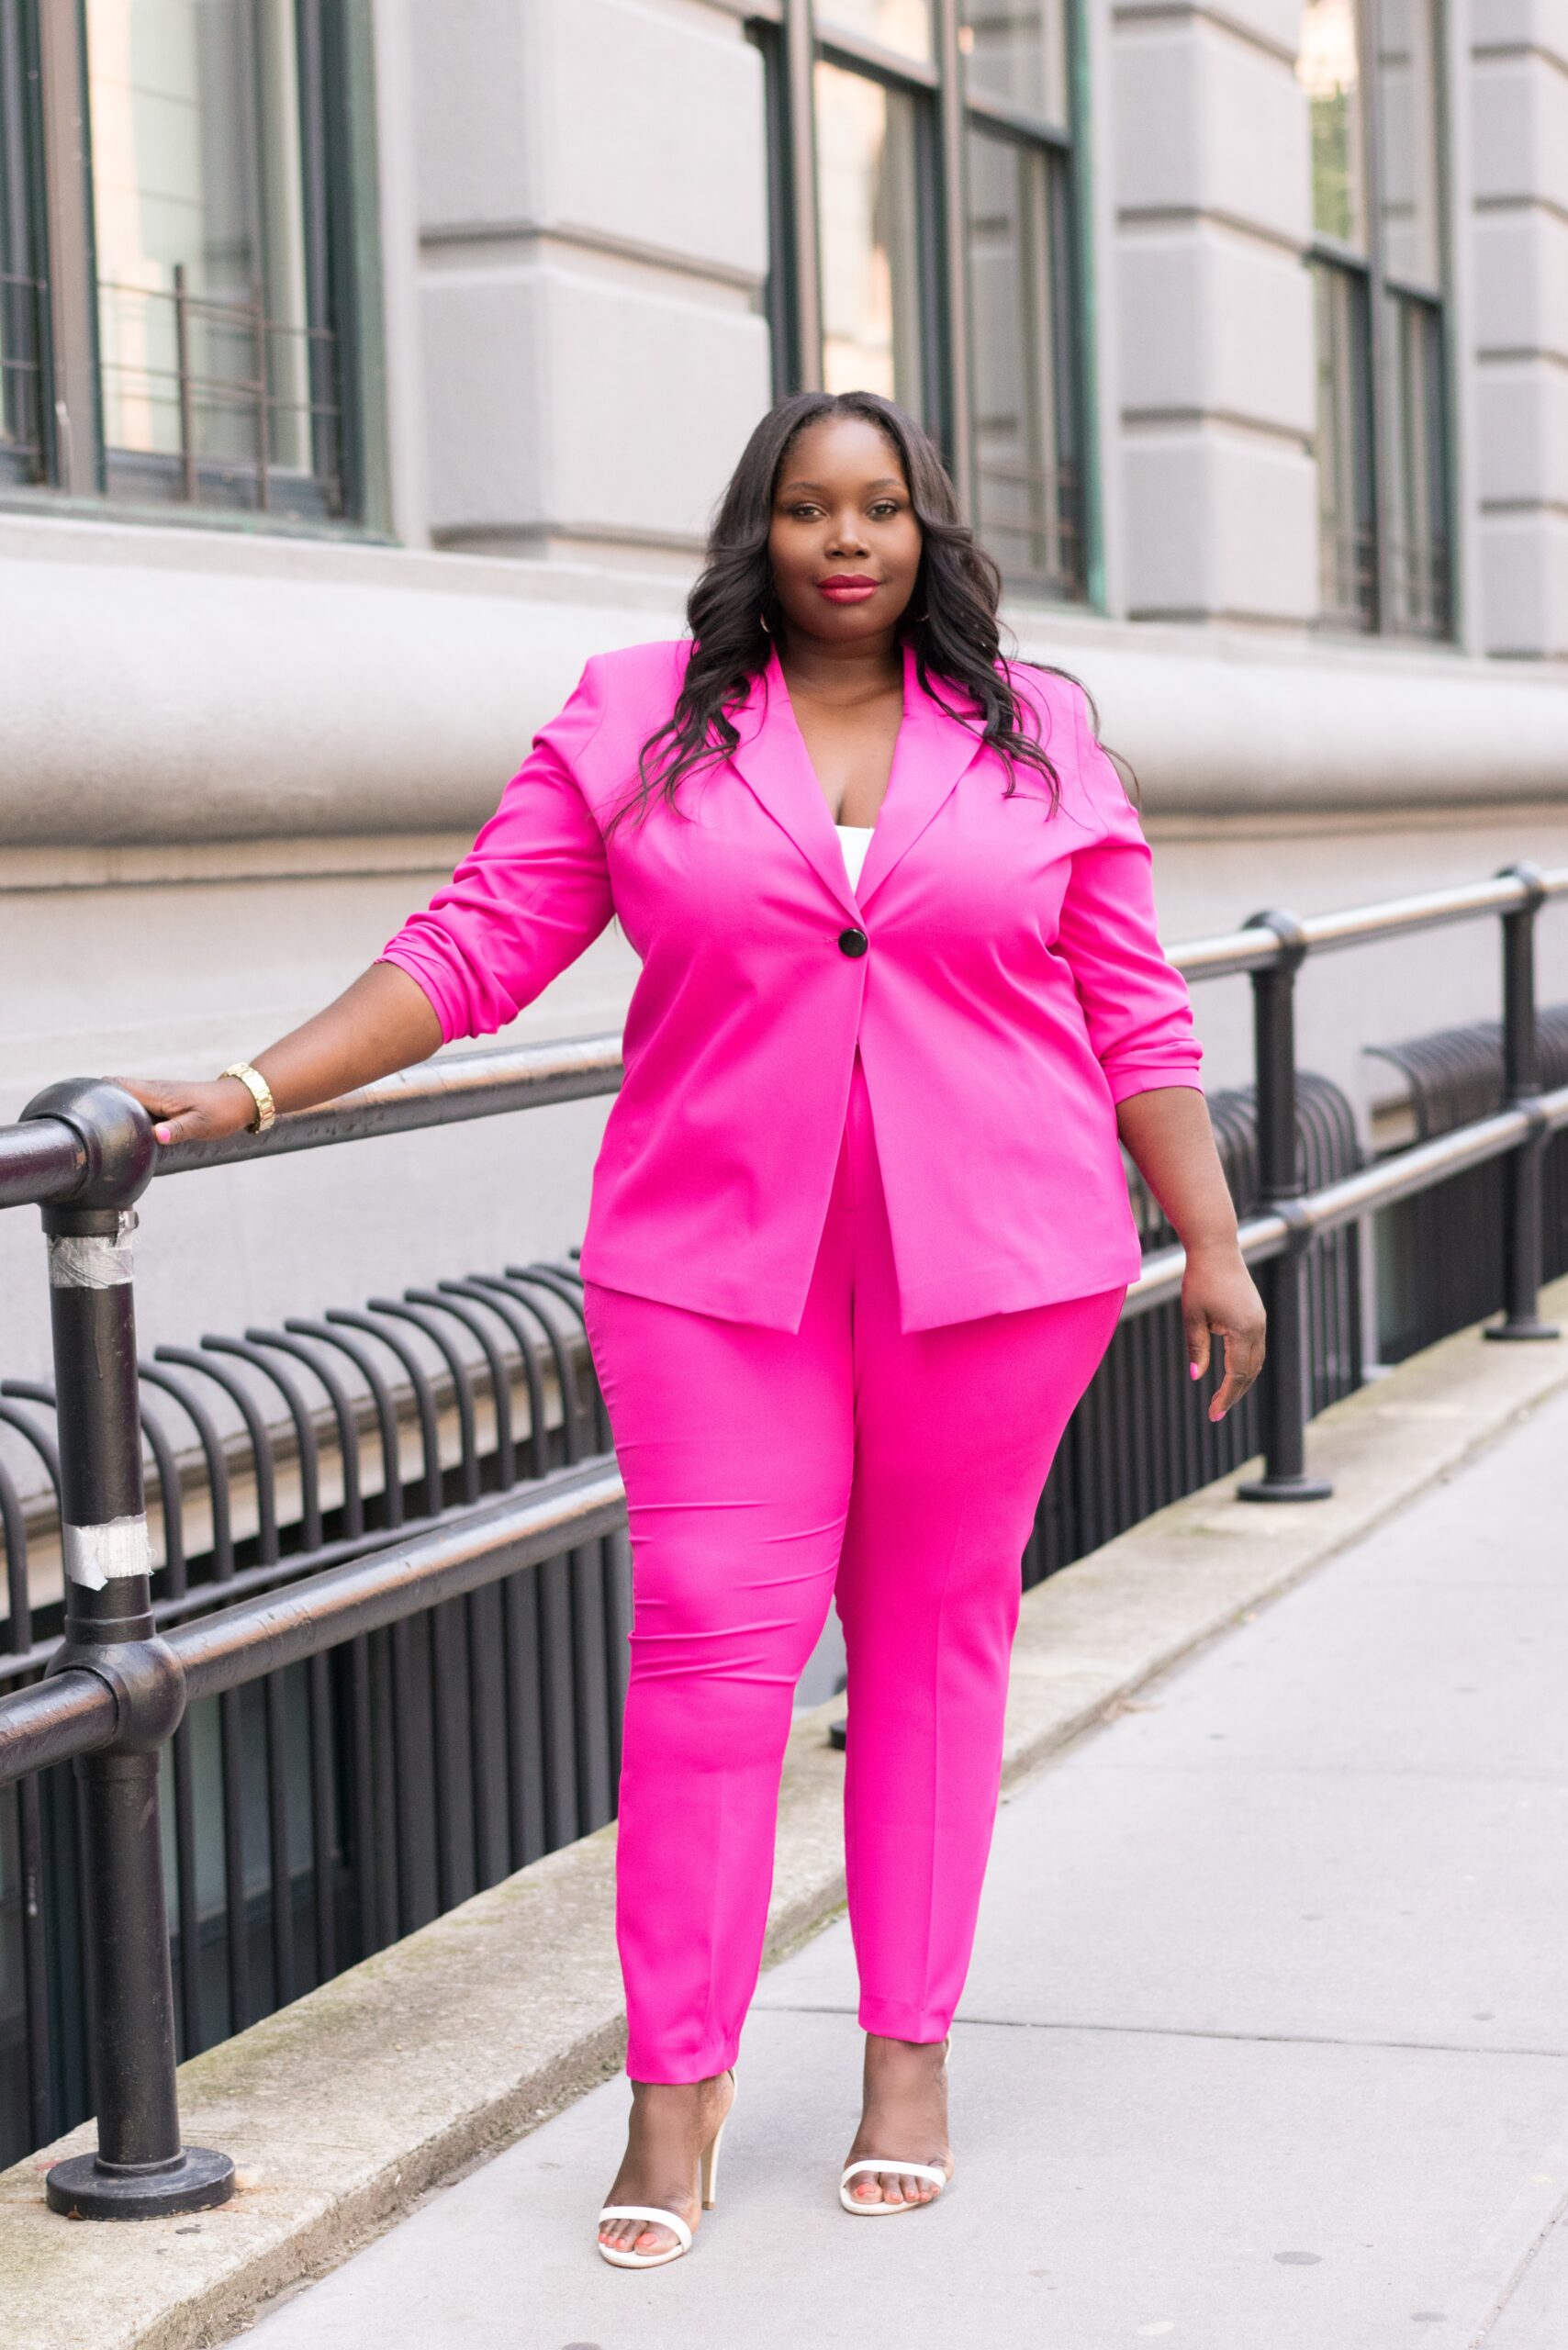 Add A Little Personality At Work With A Bright Colored Or Bold Printed Pantsuit